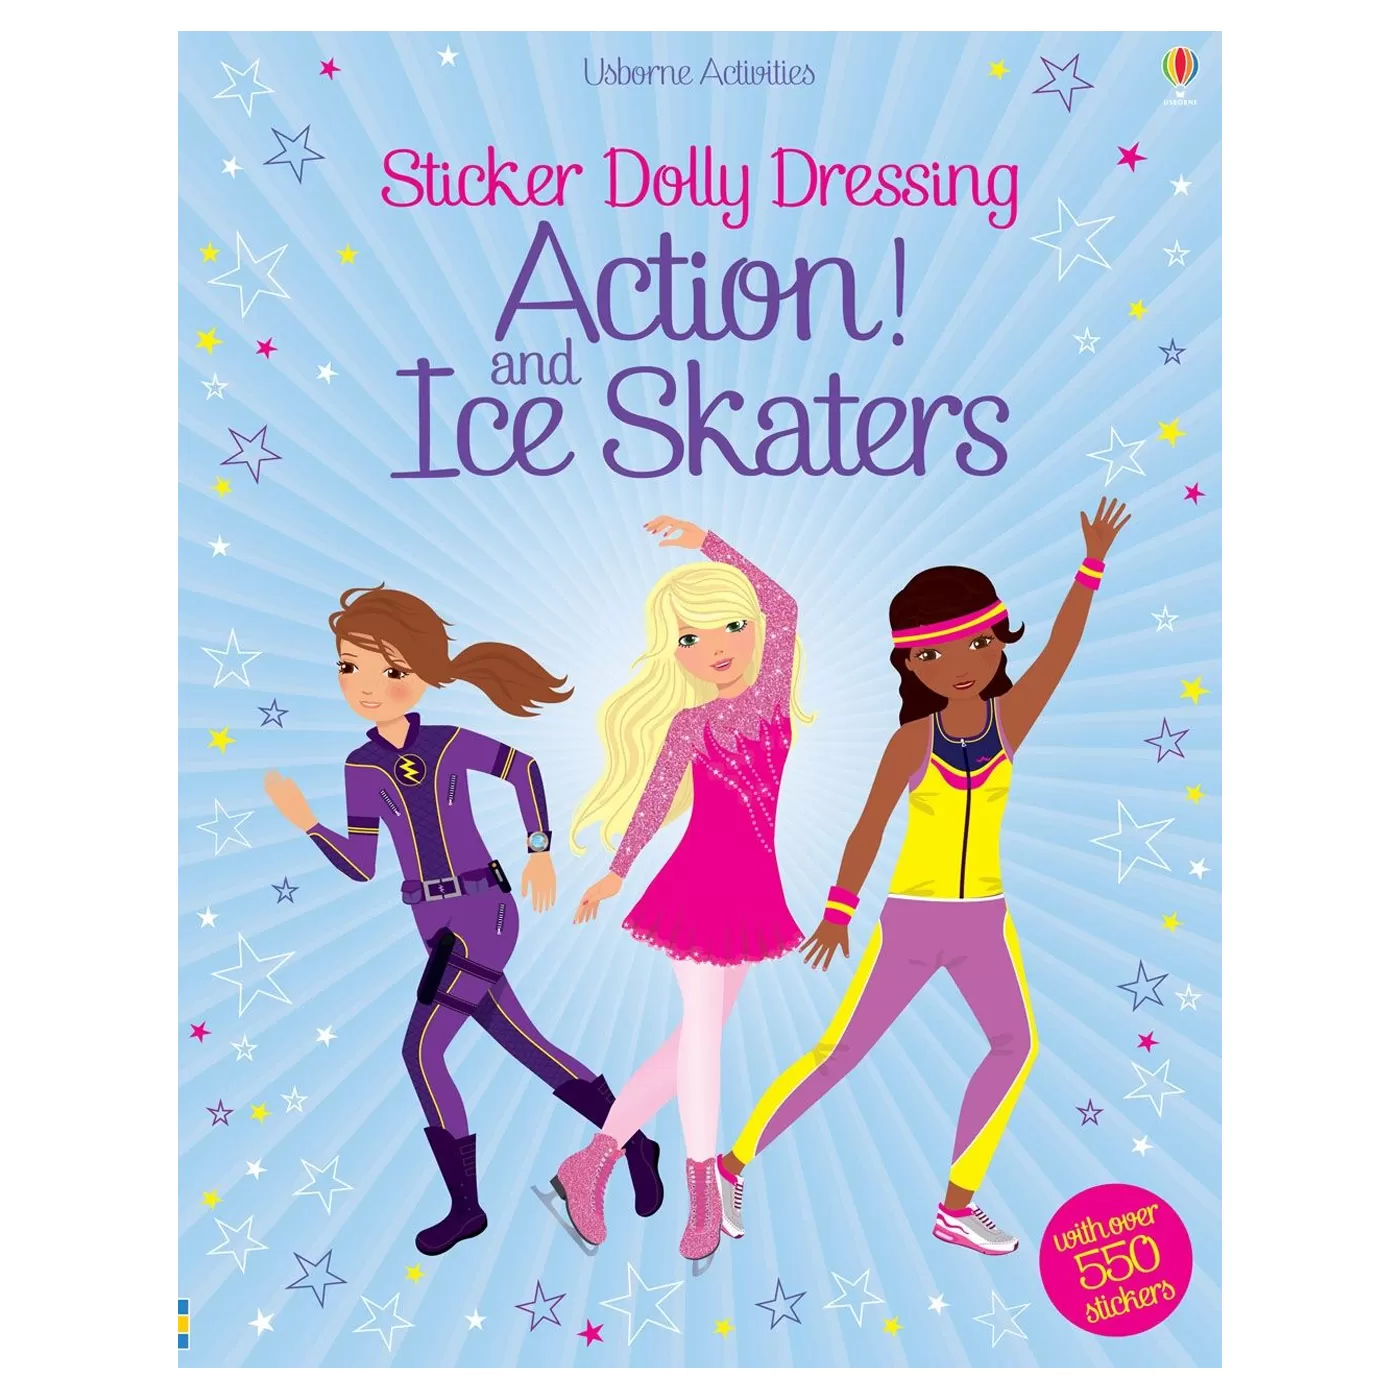 USBORNE Sticker Dolly Dressing Action! and Ice Skaters